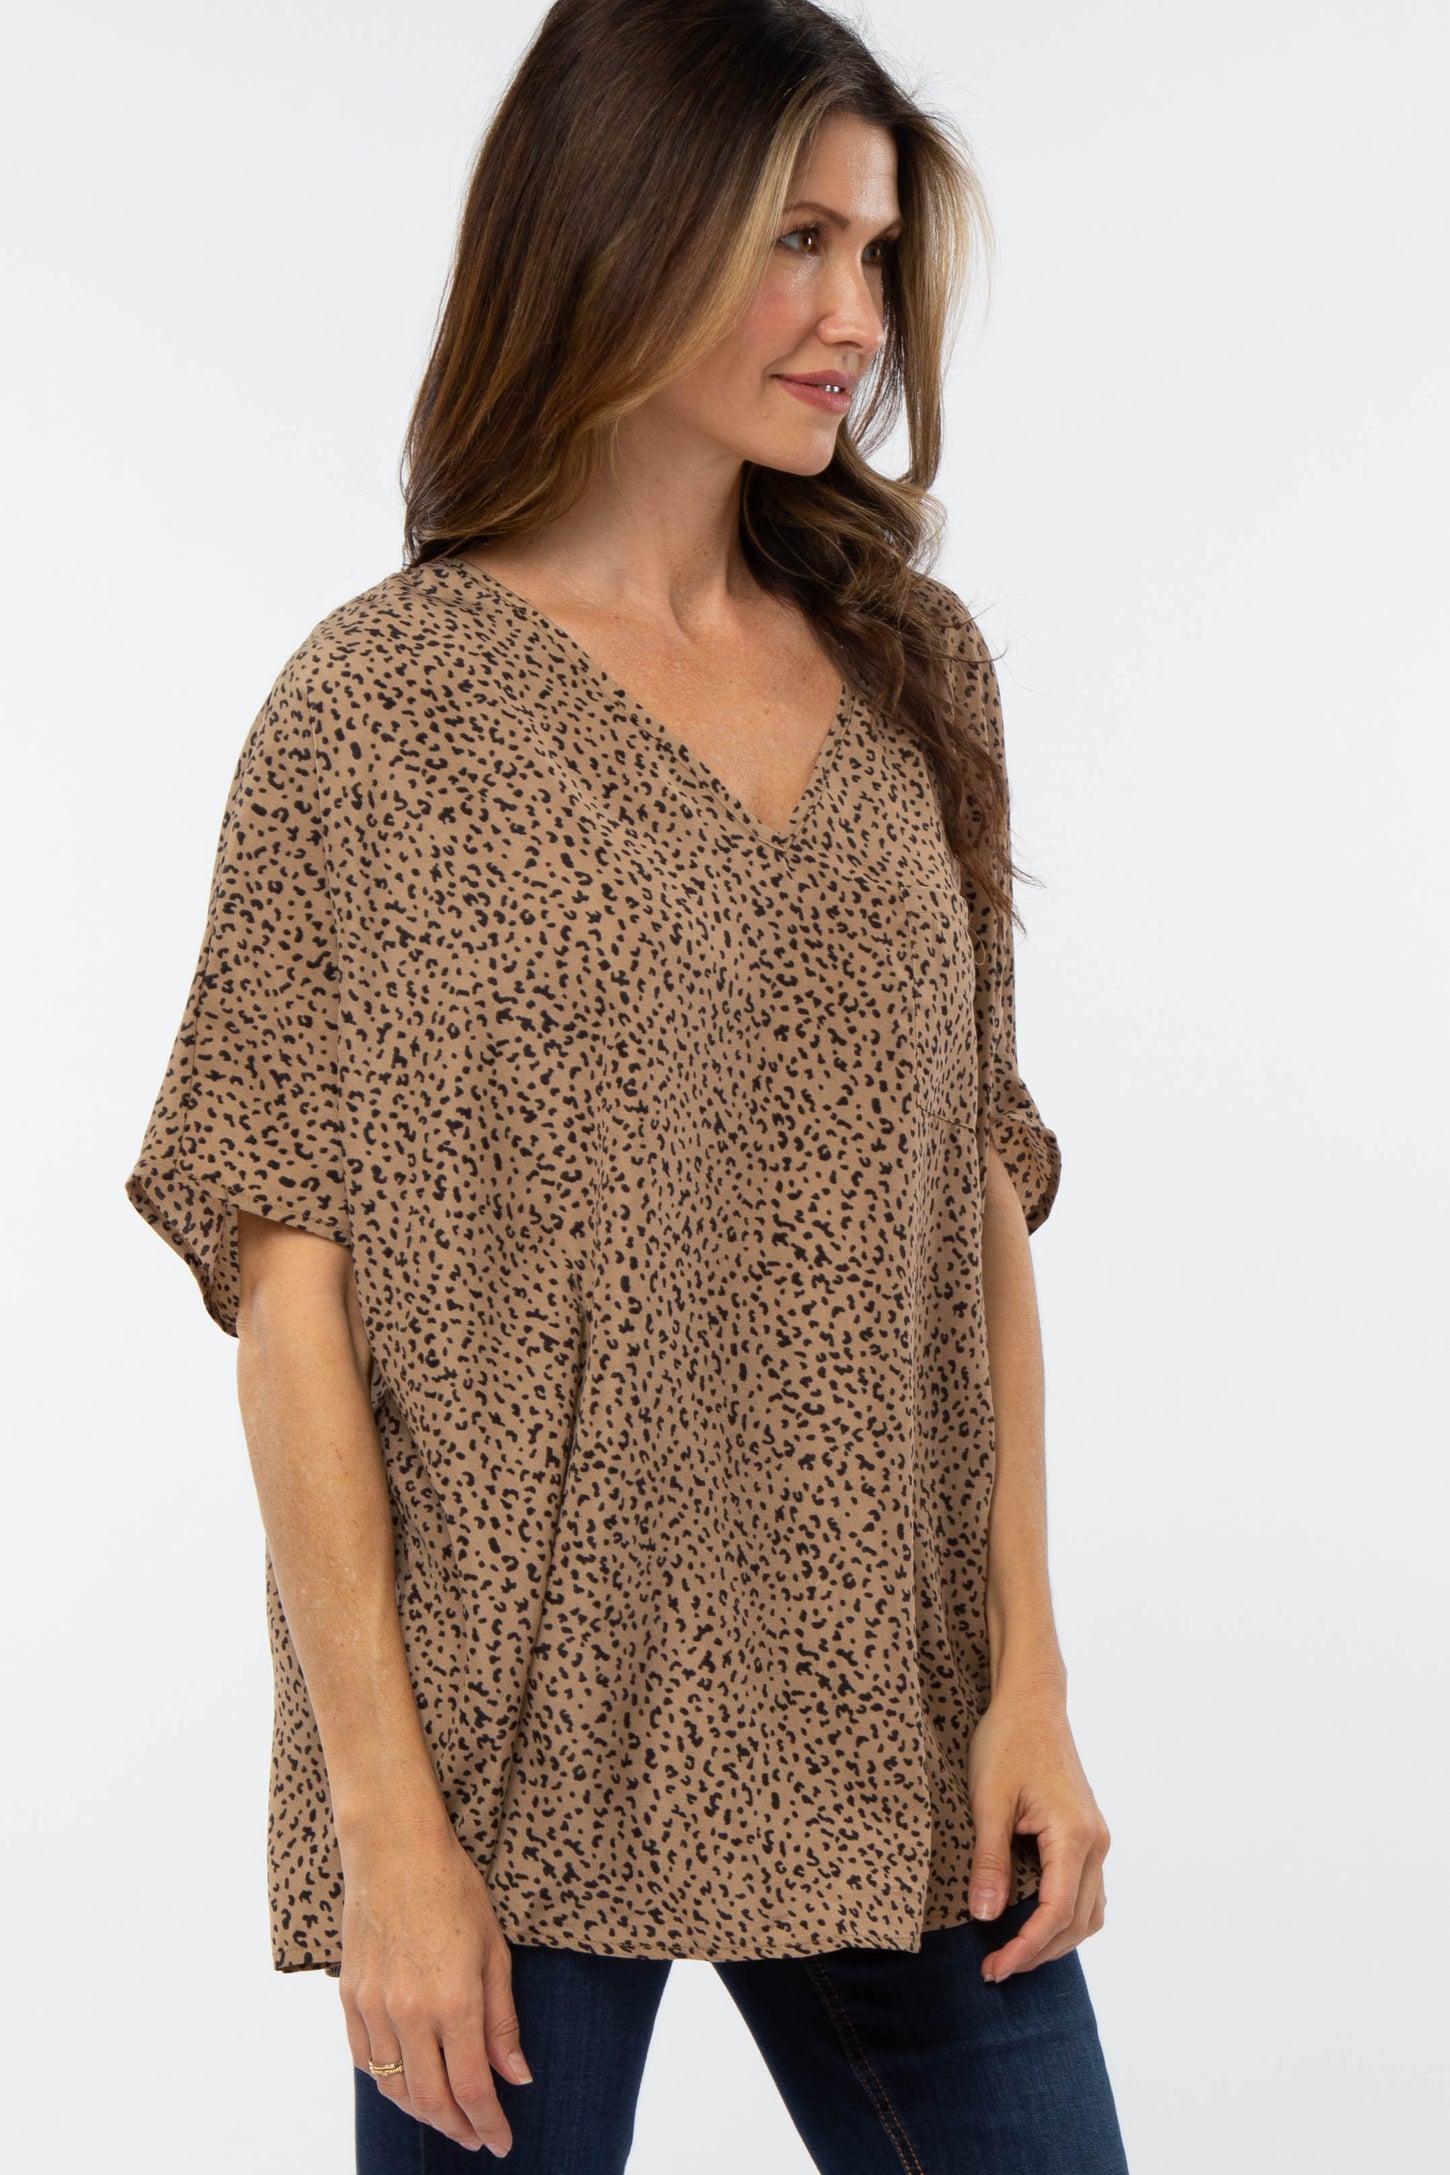 Taupe Leopard Print Pocket Front Top